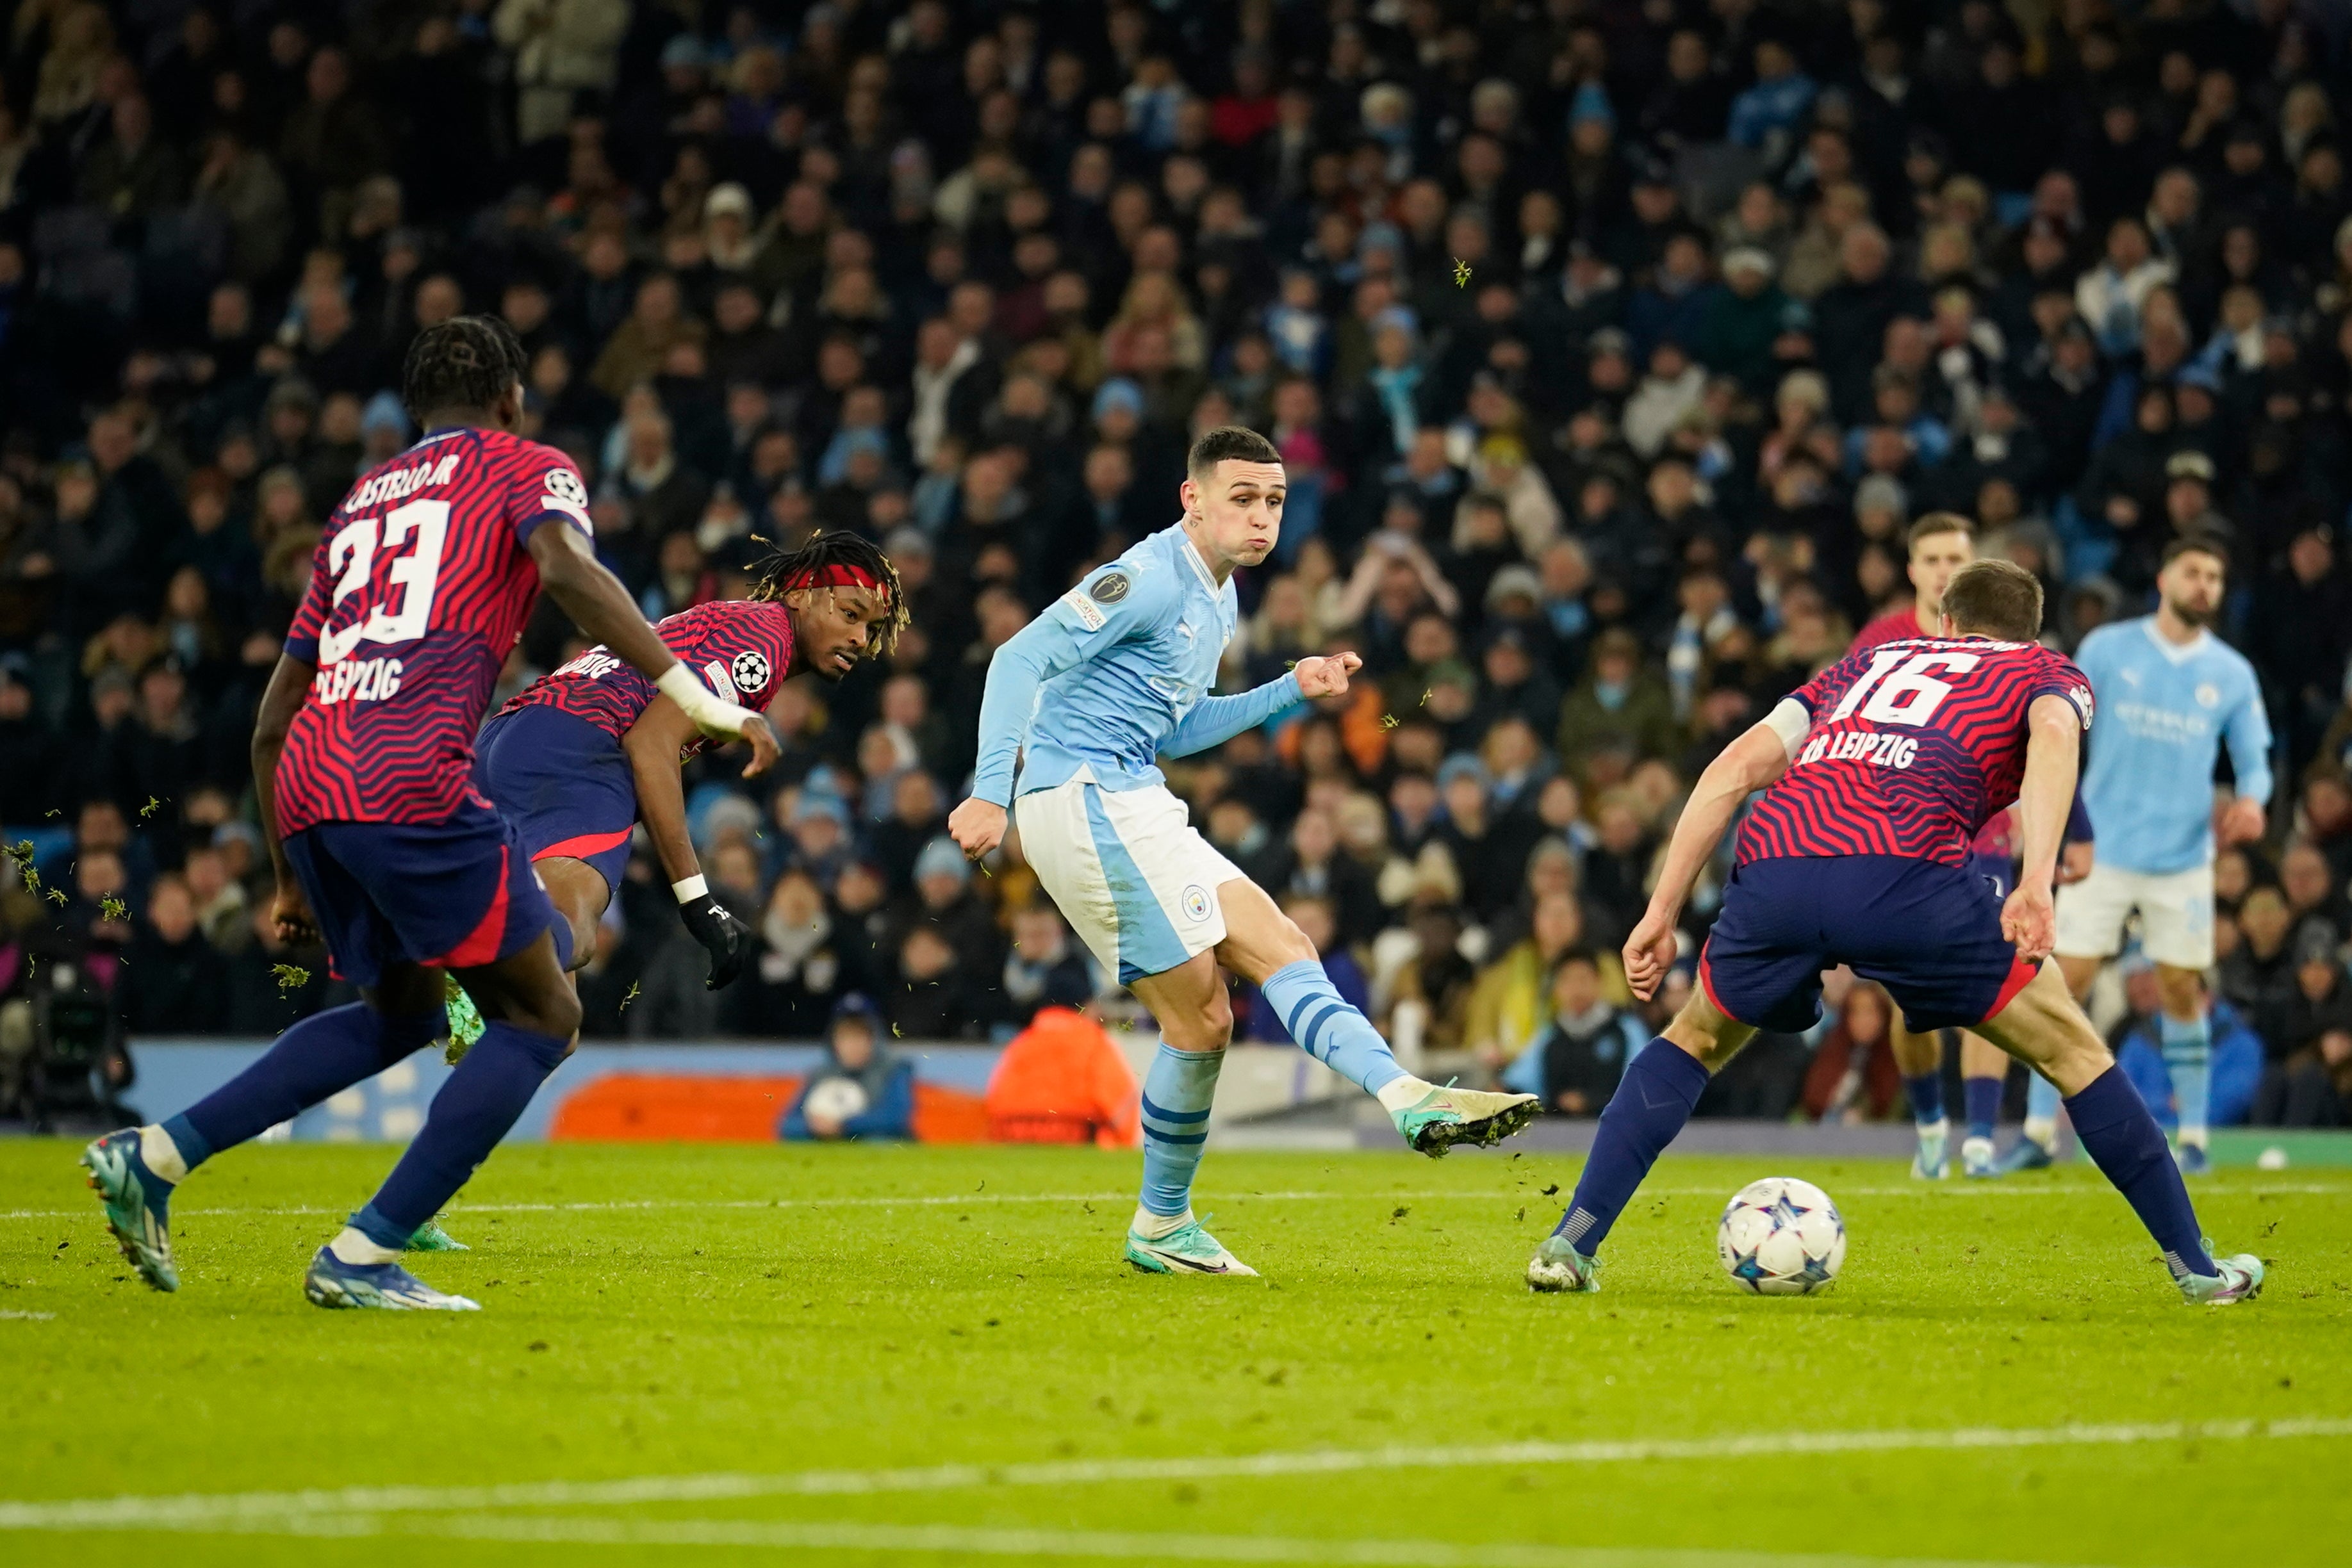 rb leipzig, phil foden, erling haaland, as manchester city celebrated their past, phil foden reminded them of their glorious present